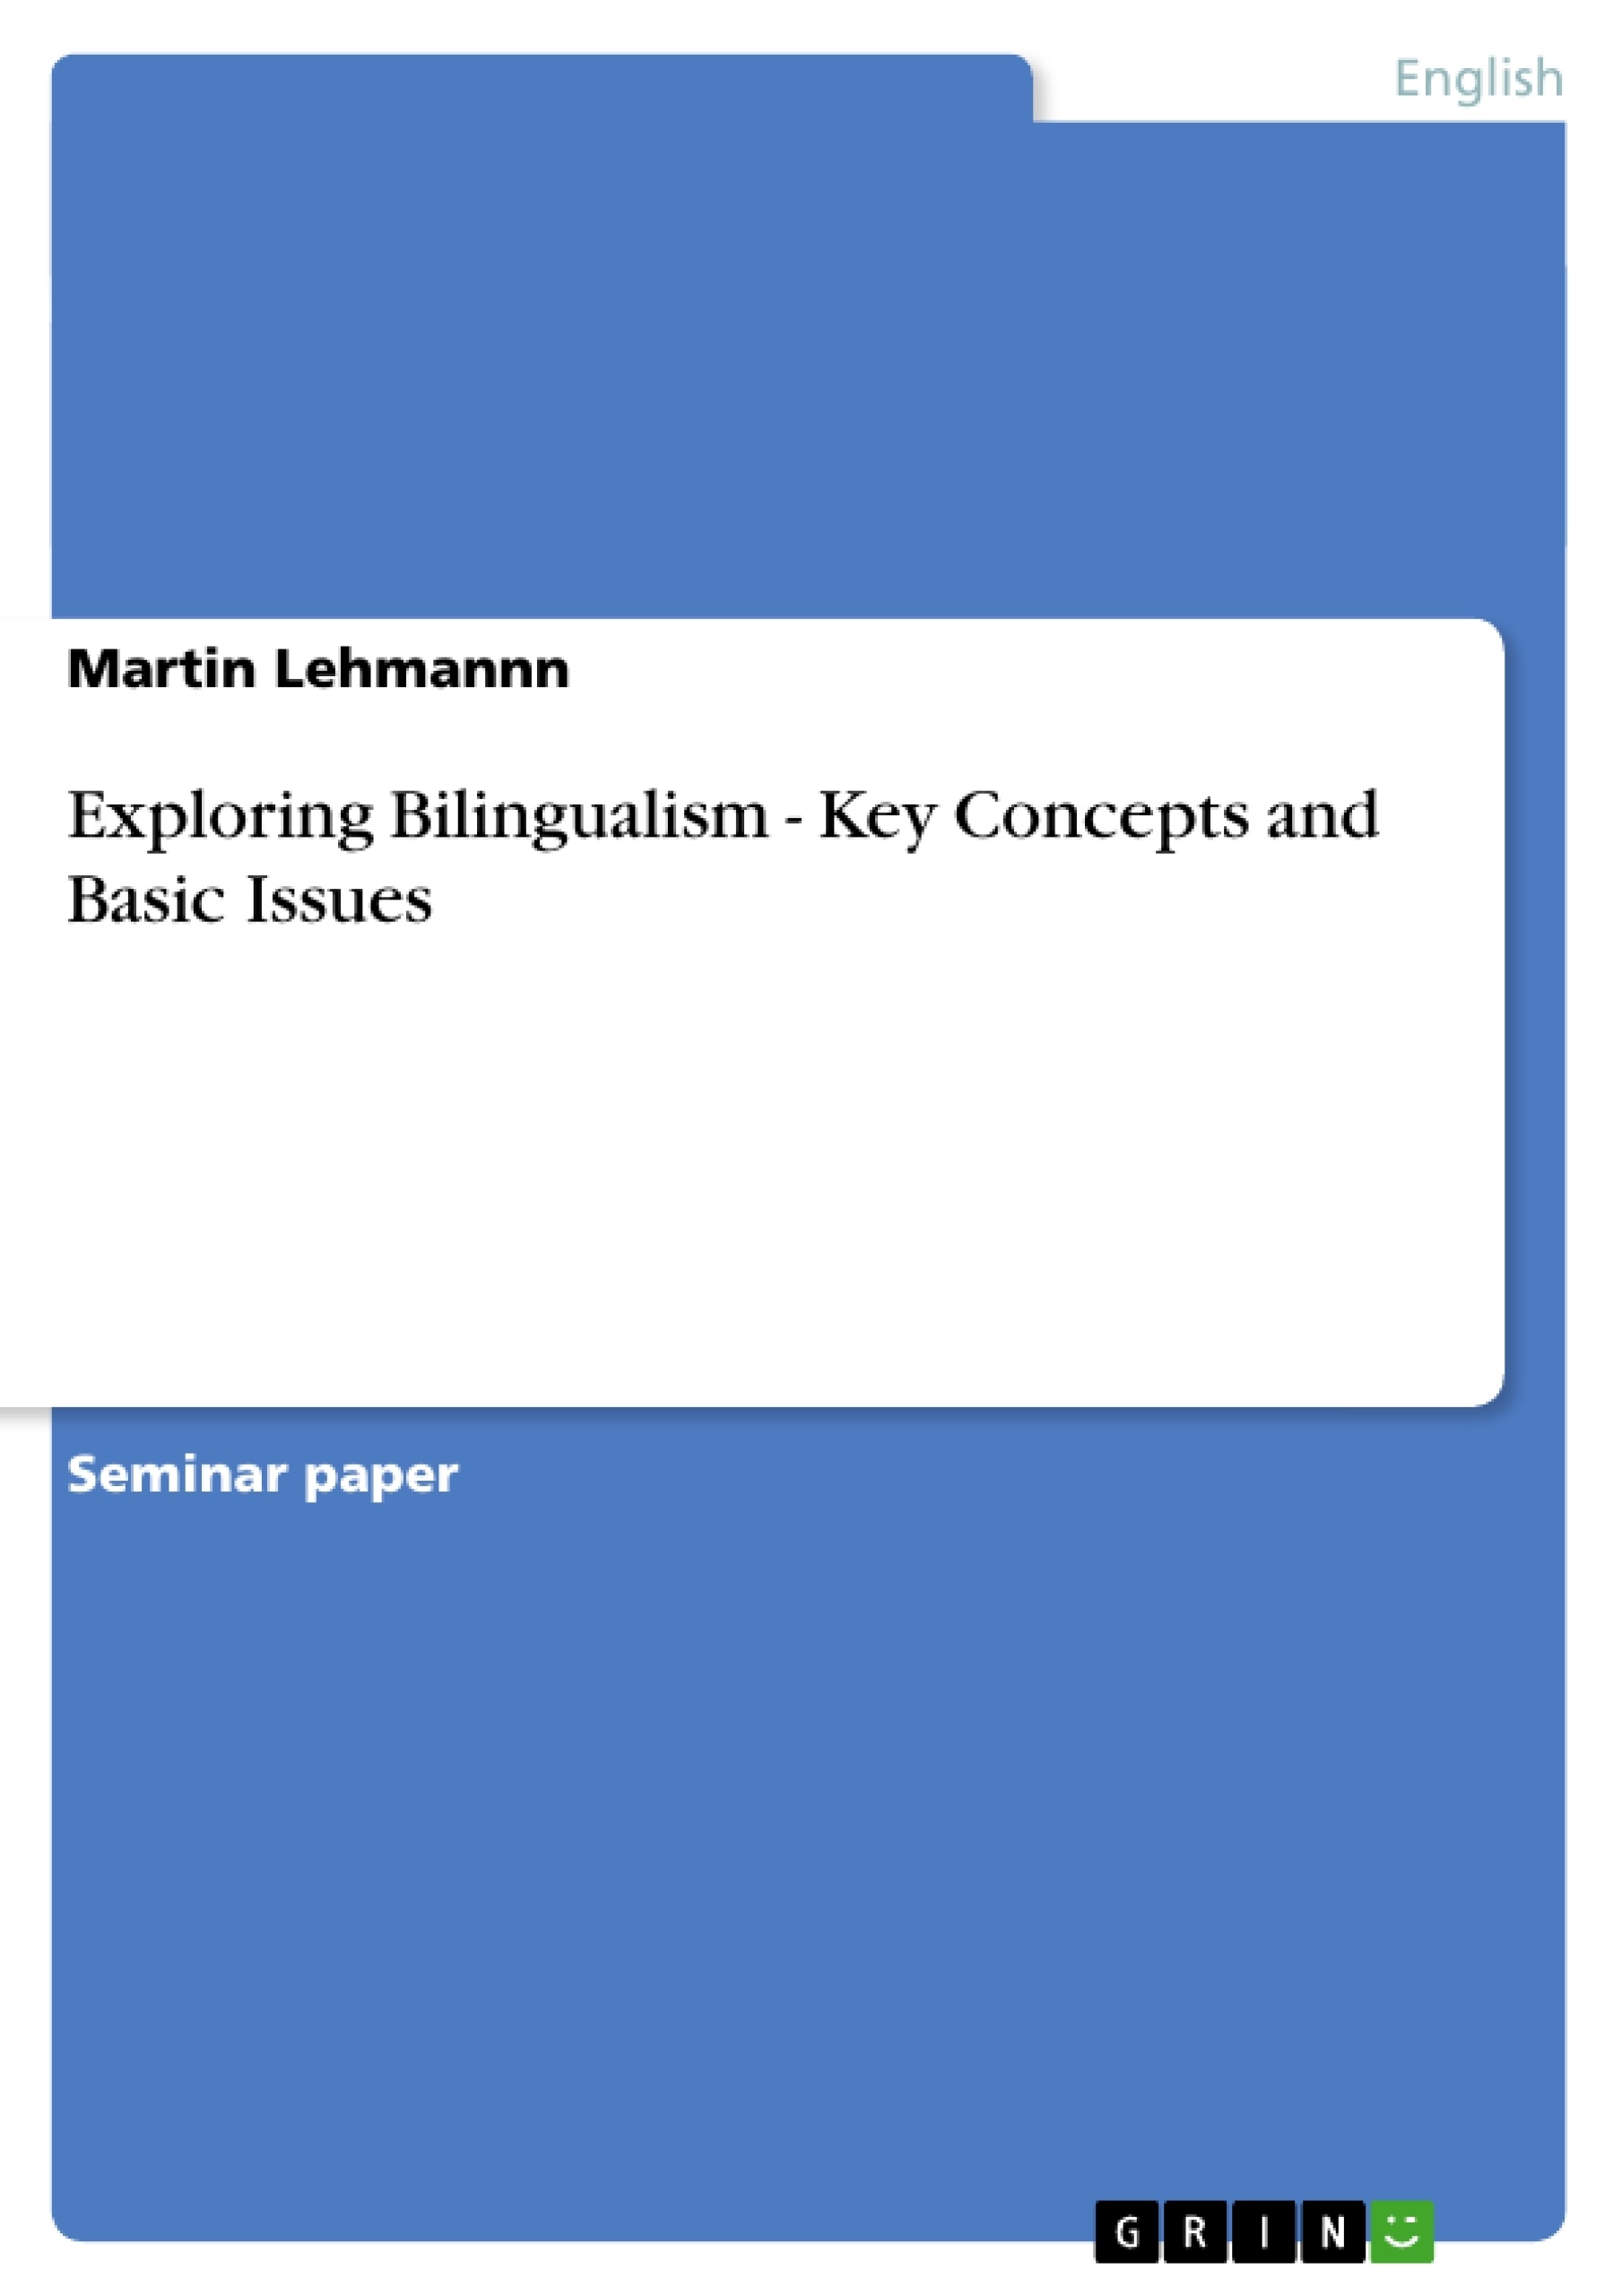 Title: Exploring Bilingualism - Key Concepts and Basic Issues